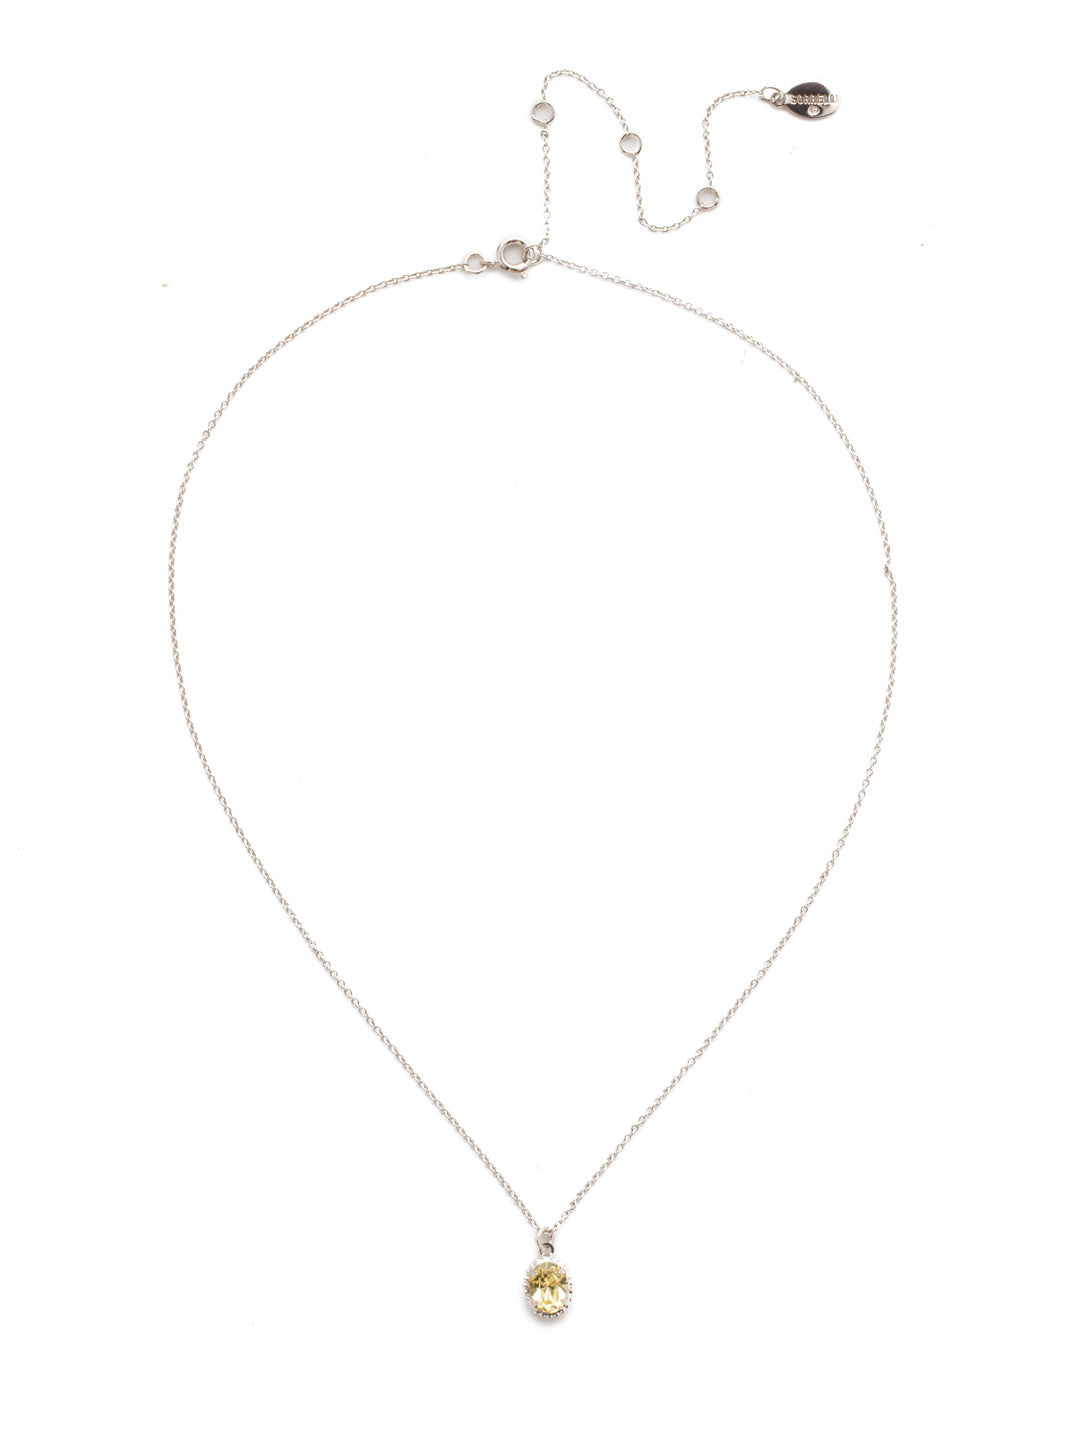 Maisie Pendant Necklace - NEF49RHTHT - <p>This is the perfect day-to-night sparkling tiny pendant necklace that has an adjustable chain to fit your neckline. From Sorrelli's Tahitian Treat collection in our Palladium Silver-tone finish.</p>